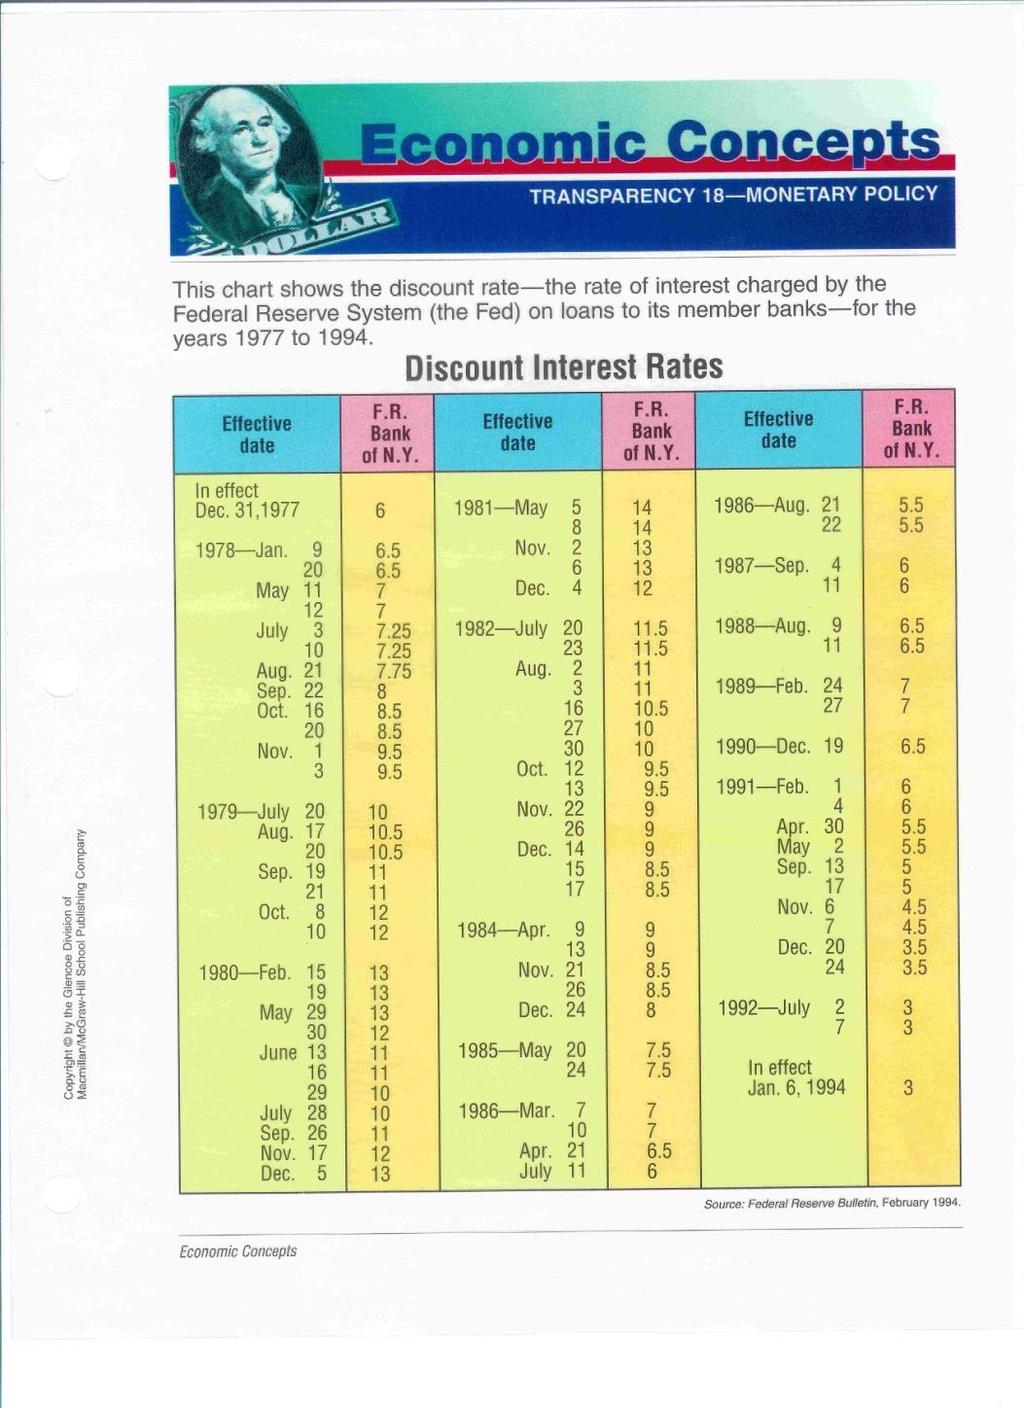 The Discount Interest rate is what the Fed charges banks that want to borrow money.